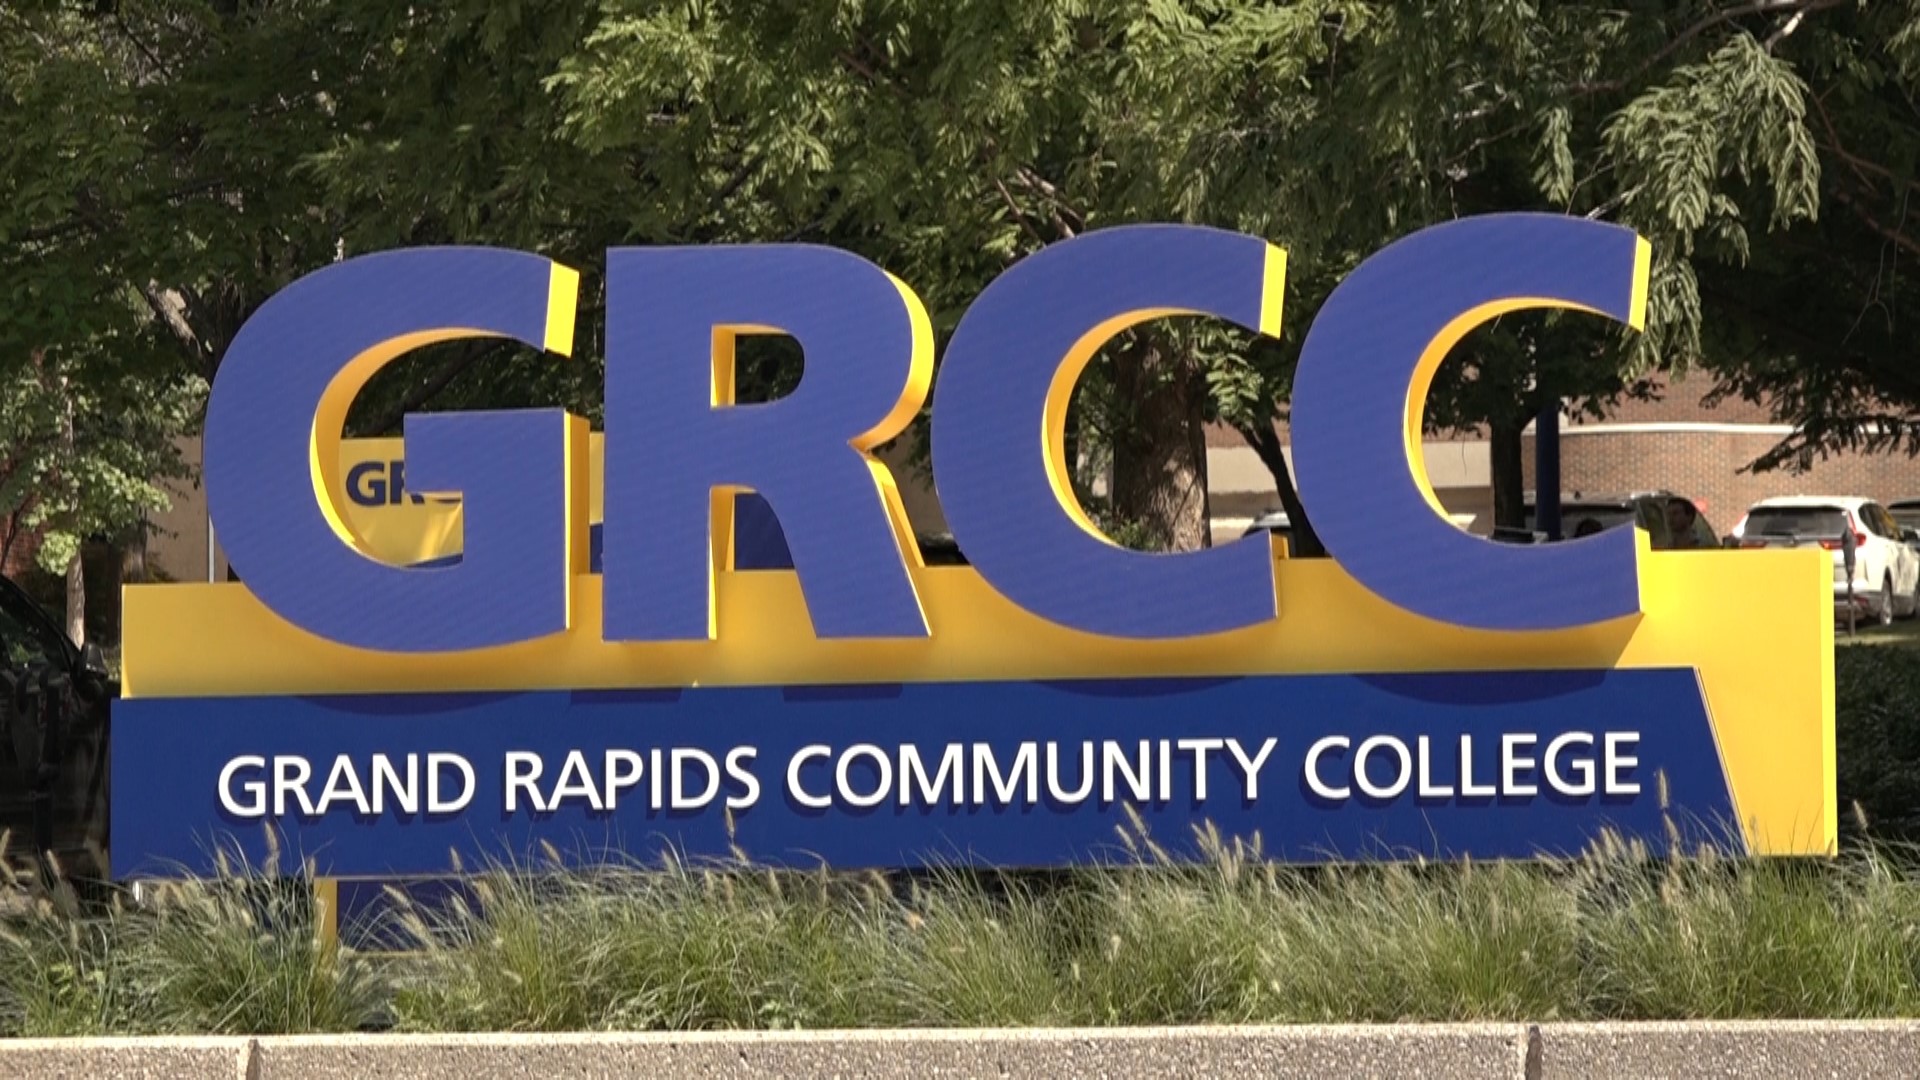 Grand Rapids Community College donated more than 70 tables to a local district in need.